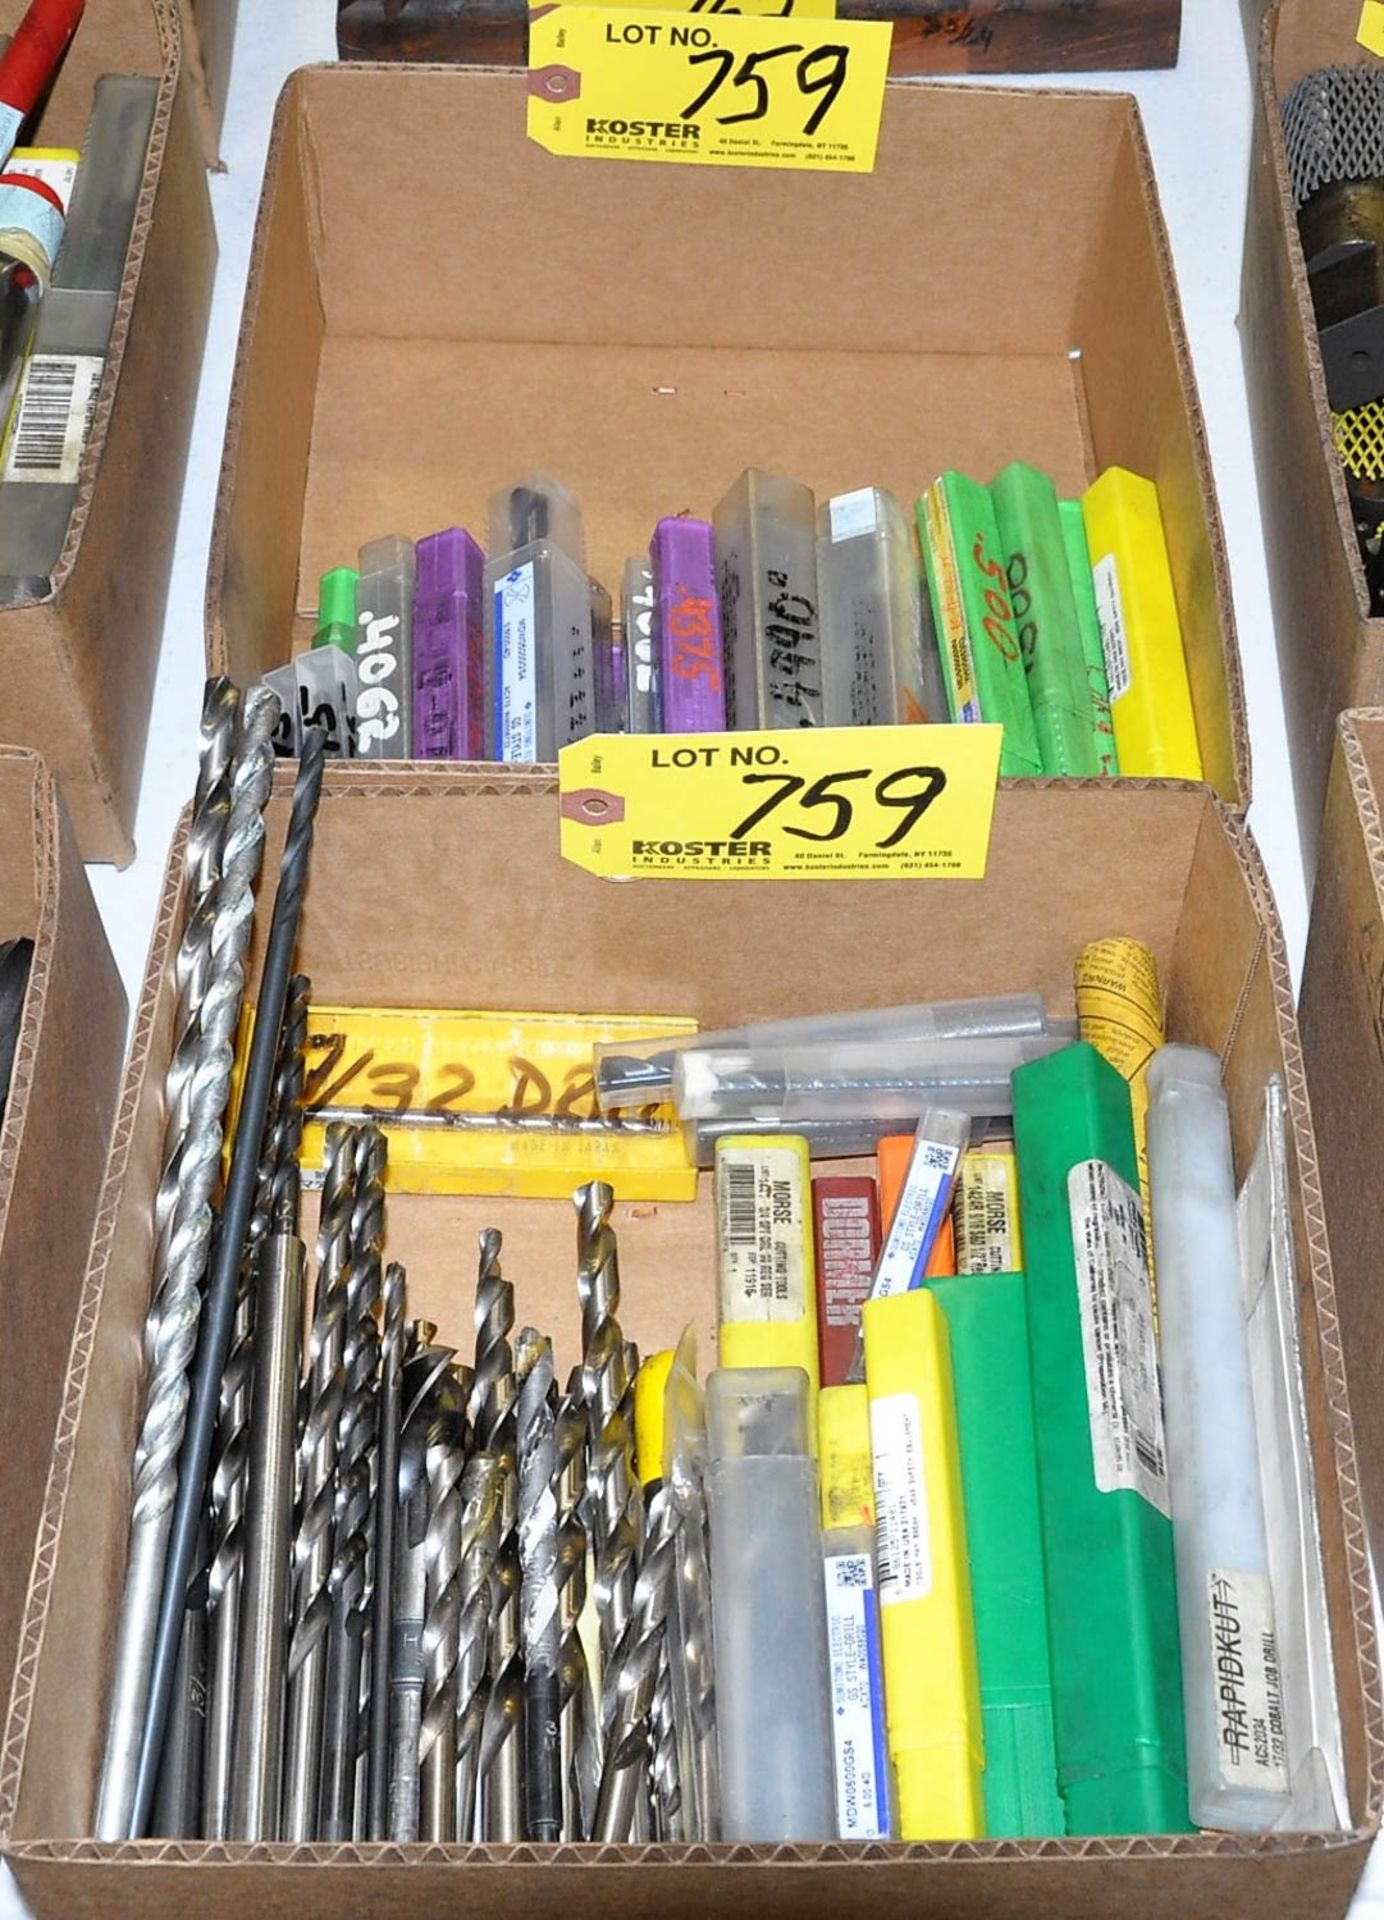 New Packaged Carbide and Standard Straight Shank Drills in (2) Boxes